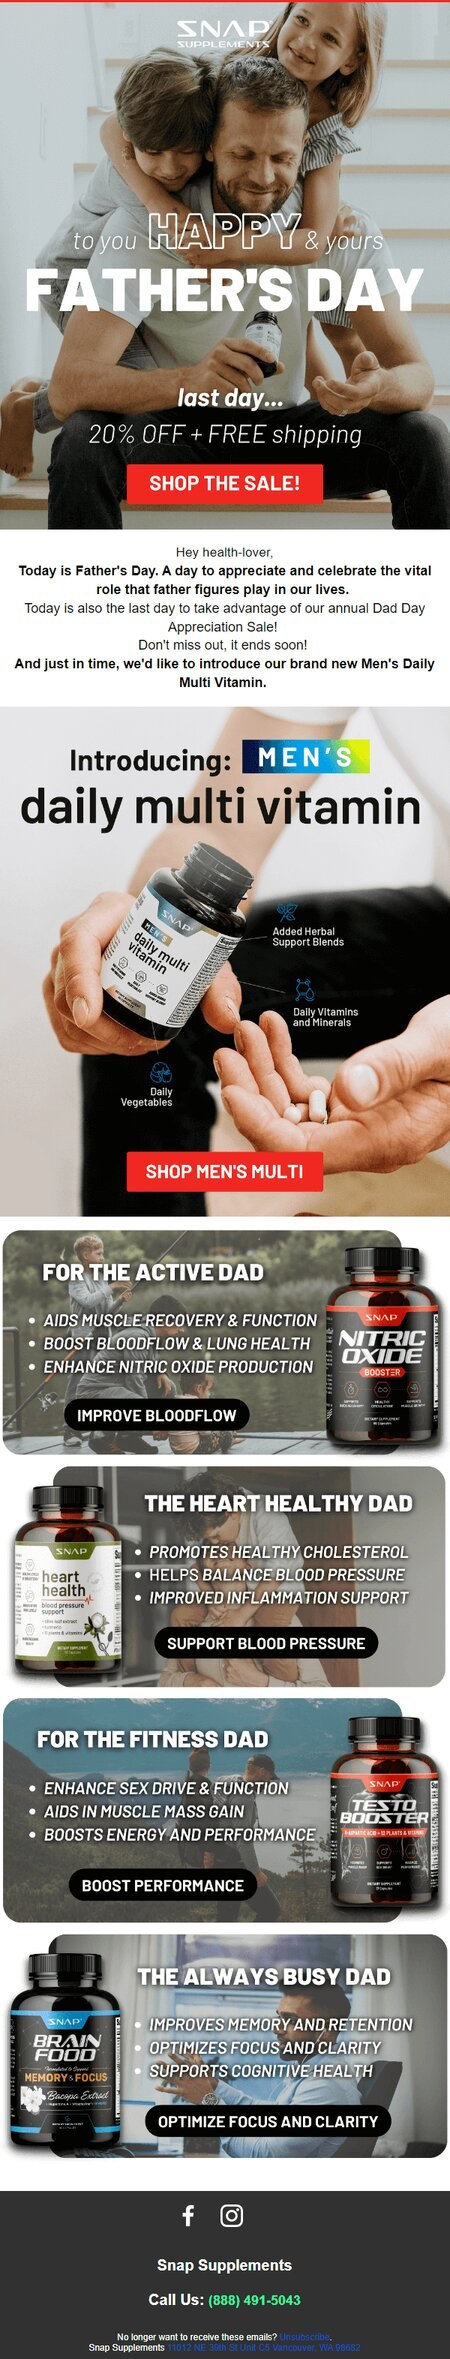 https://www.omnisend.com/blog/wp-content/uploads/2023/05/fathers_day_snap_supplements.jpg